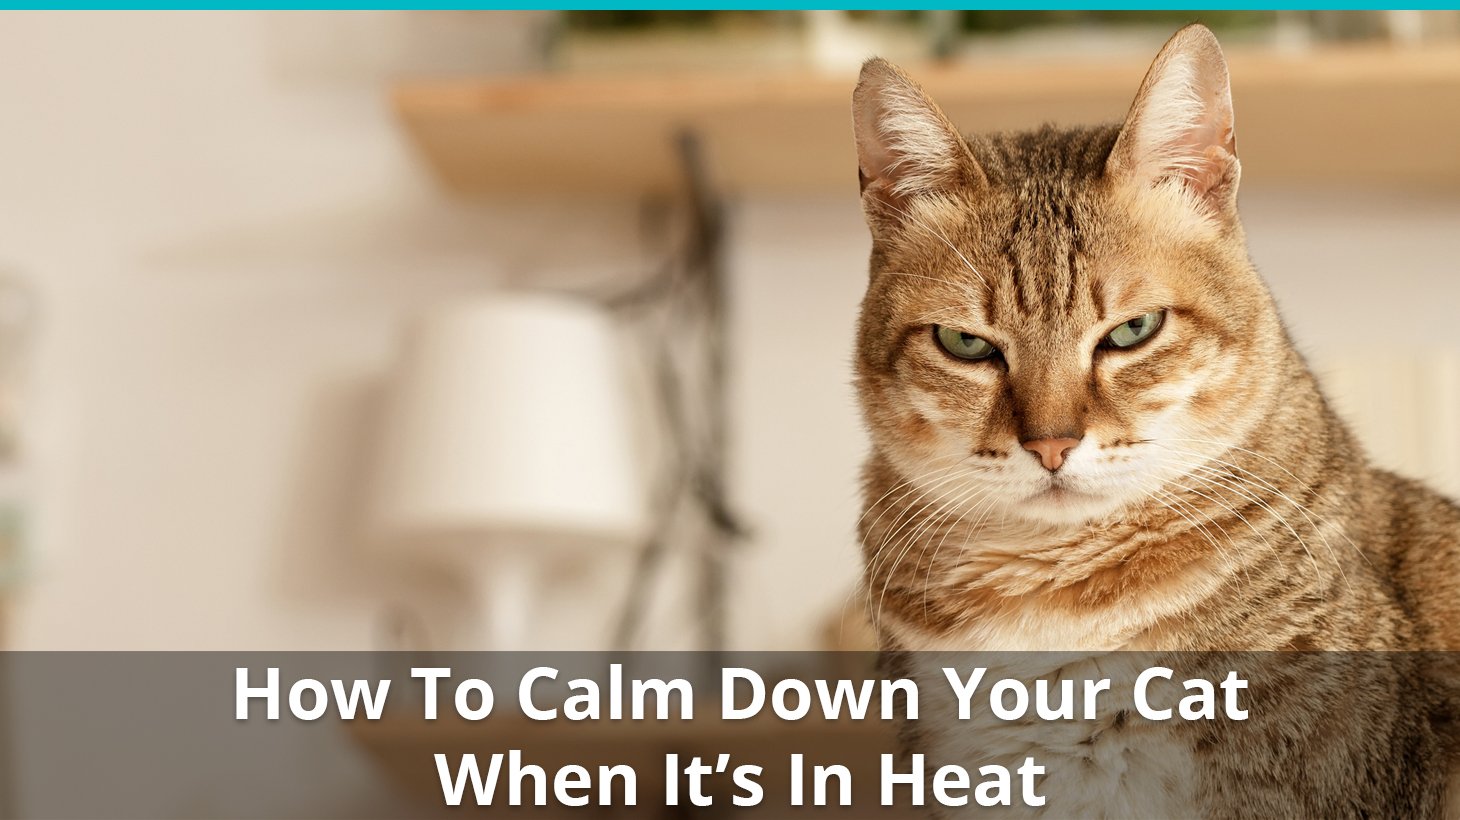 what to do for my cat in heat